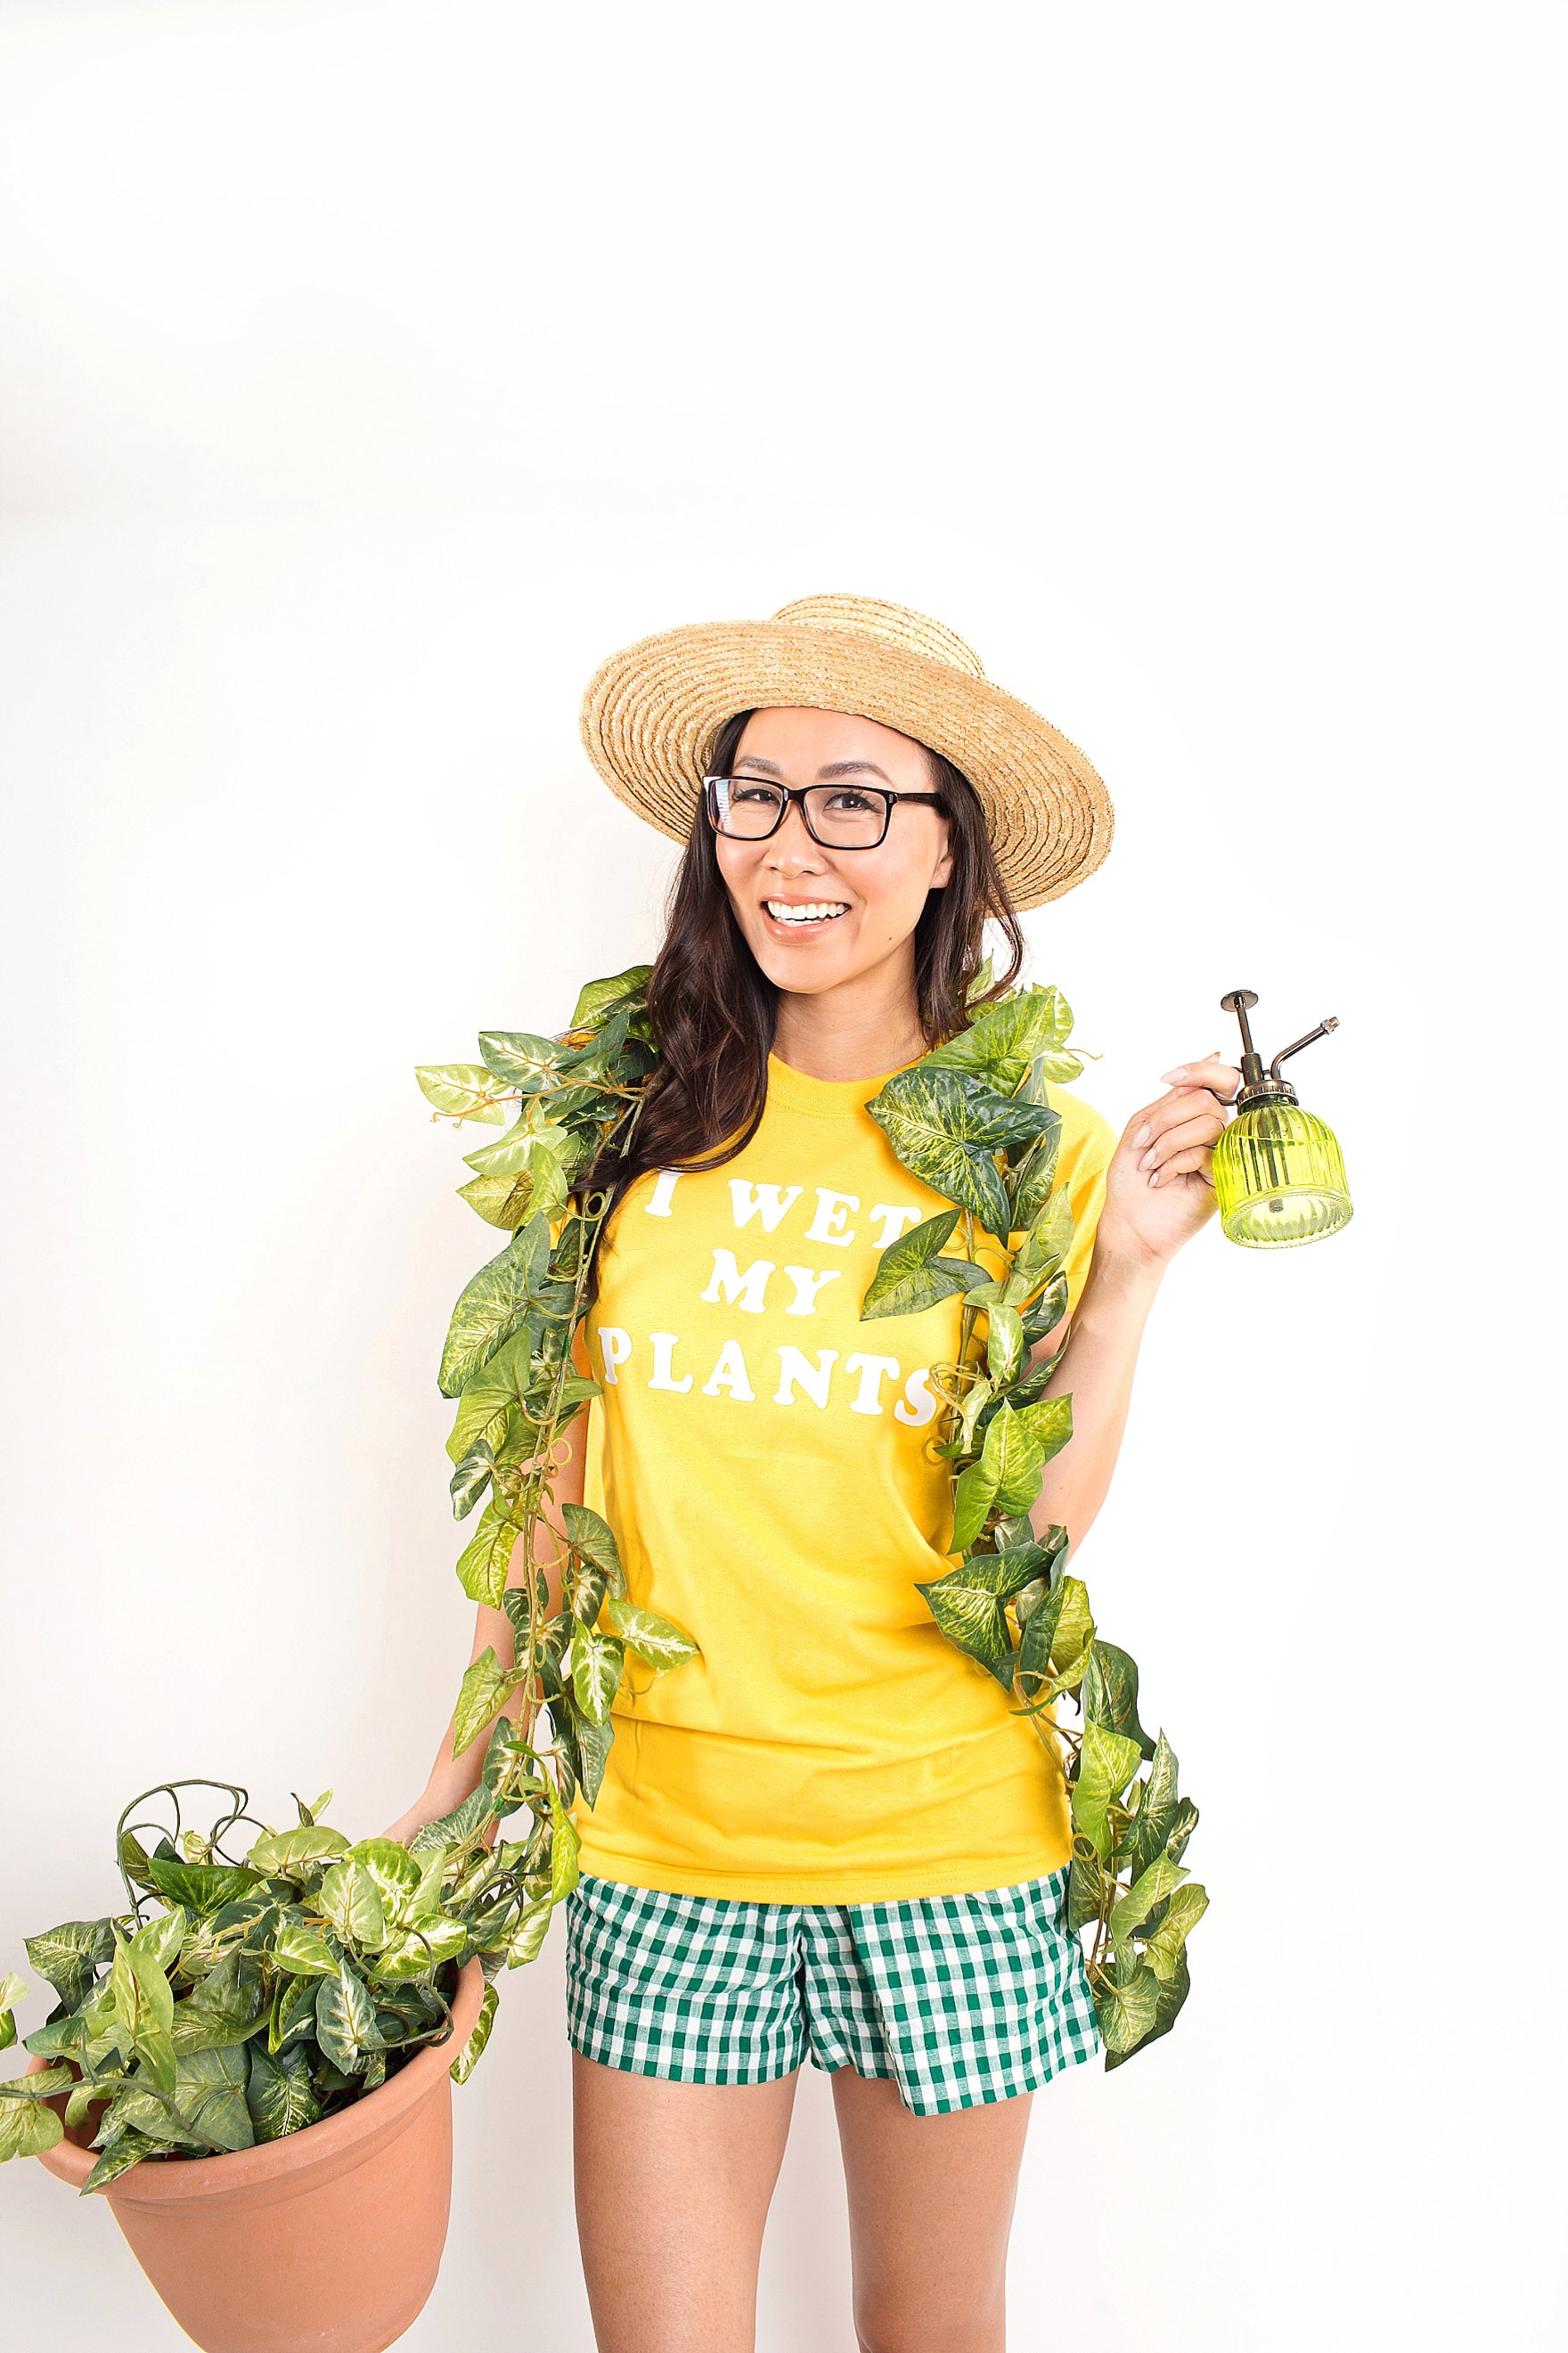 crazy plant lady costume halloween last minute funny plant shirts I wet my plants